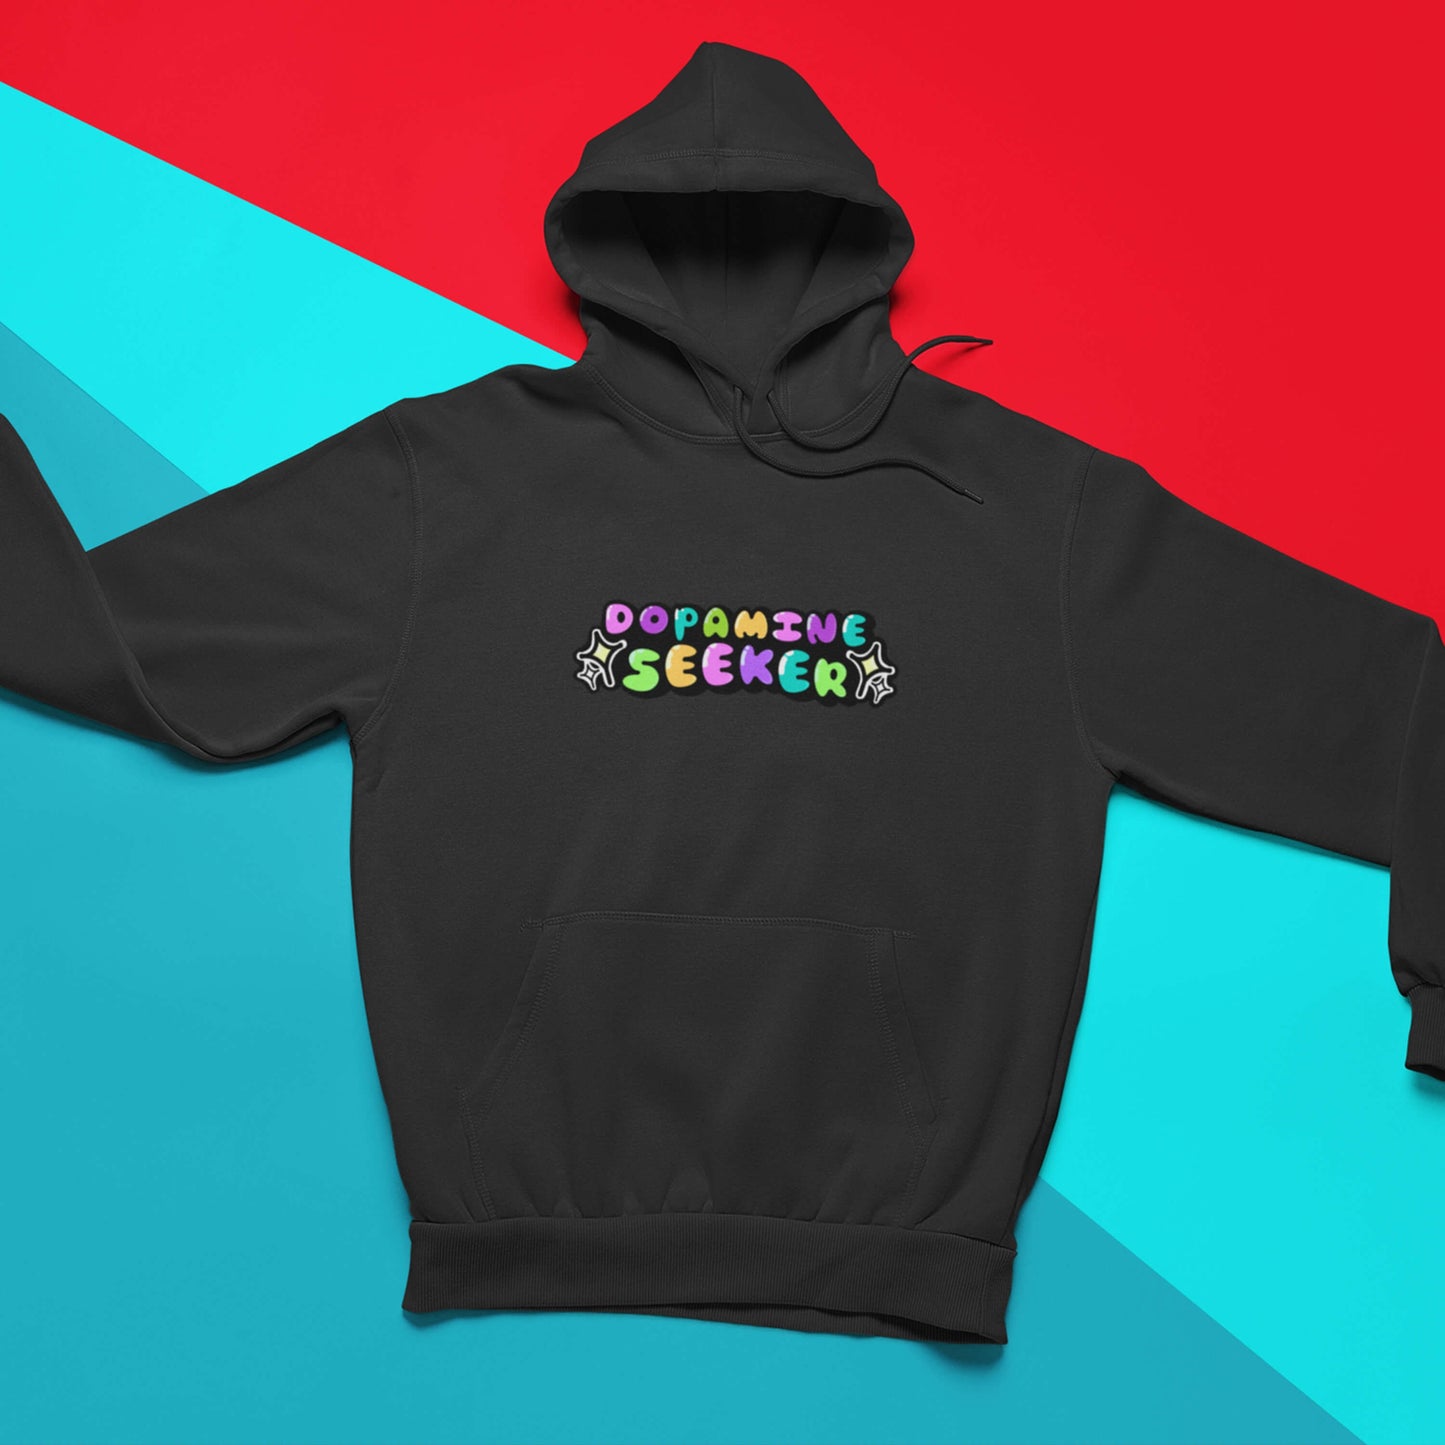 The Dopamine Seeker Black Hoodie laying on a blue and red background. The black cotton hoodie features centre rainbow bubble text that reads 'dopamine seeker' with yellow and black sparkles surrounding it. The hoodie has black drawstrings and a large centre pocket. The hoodie was designed to raise awareness for ADHD and neurodivergence. 